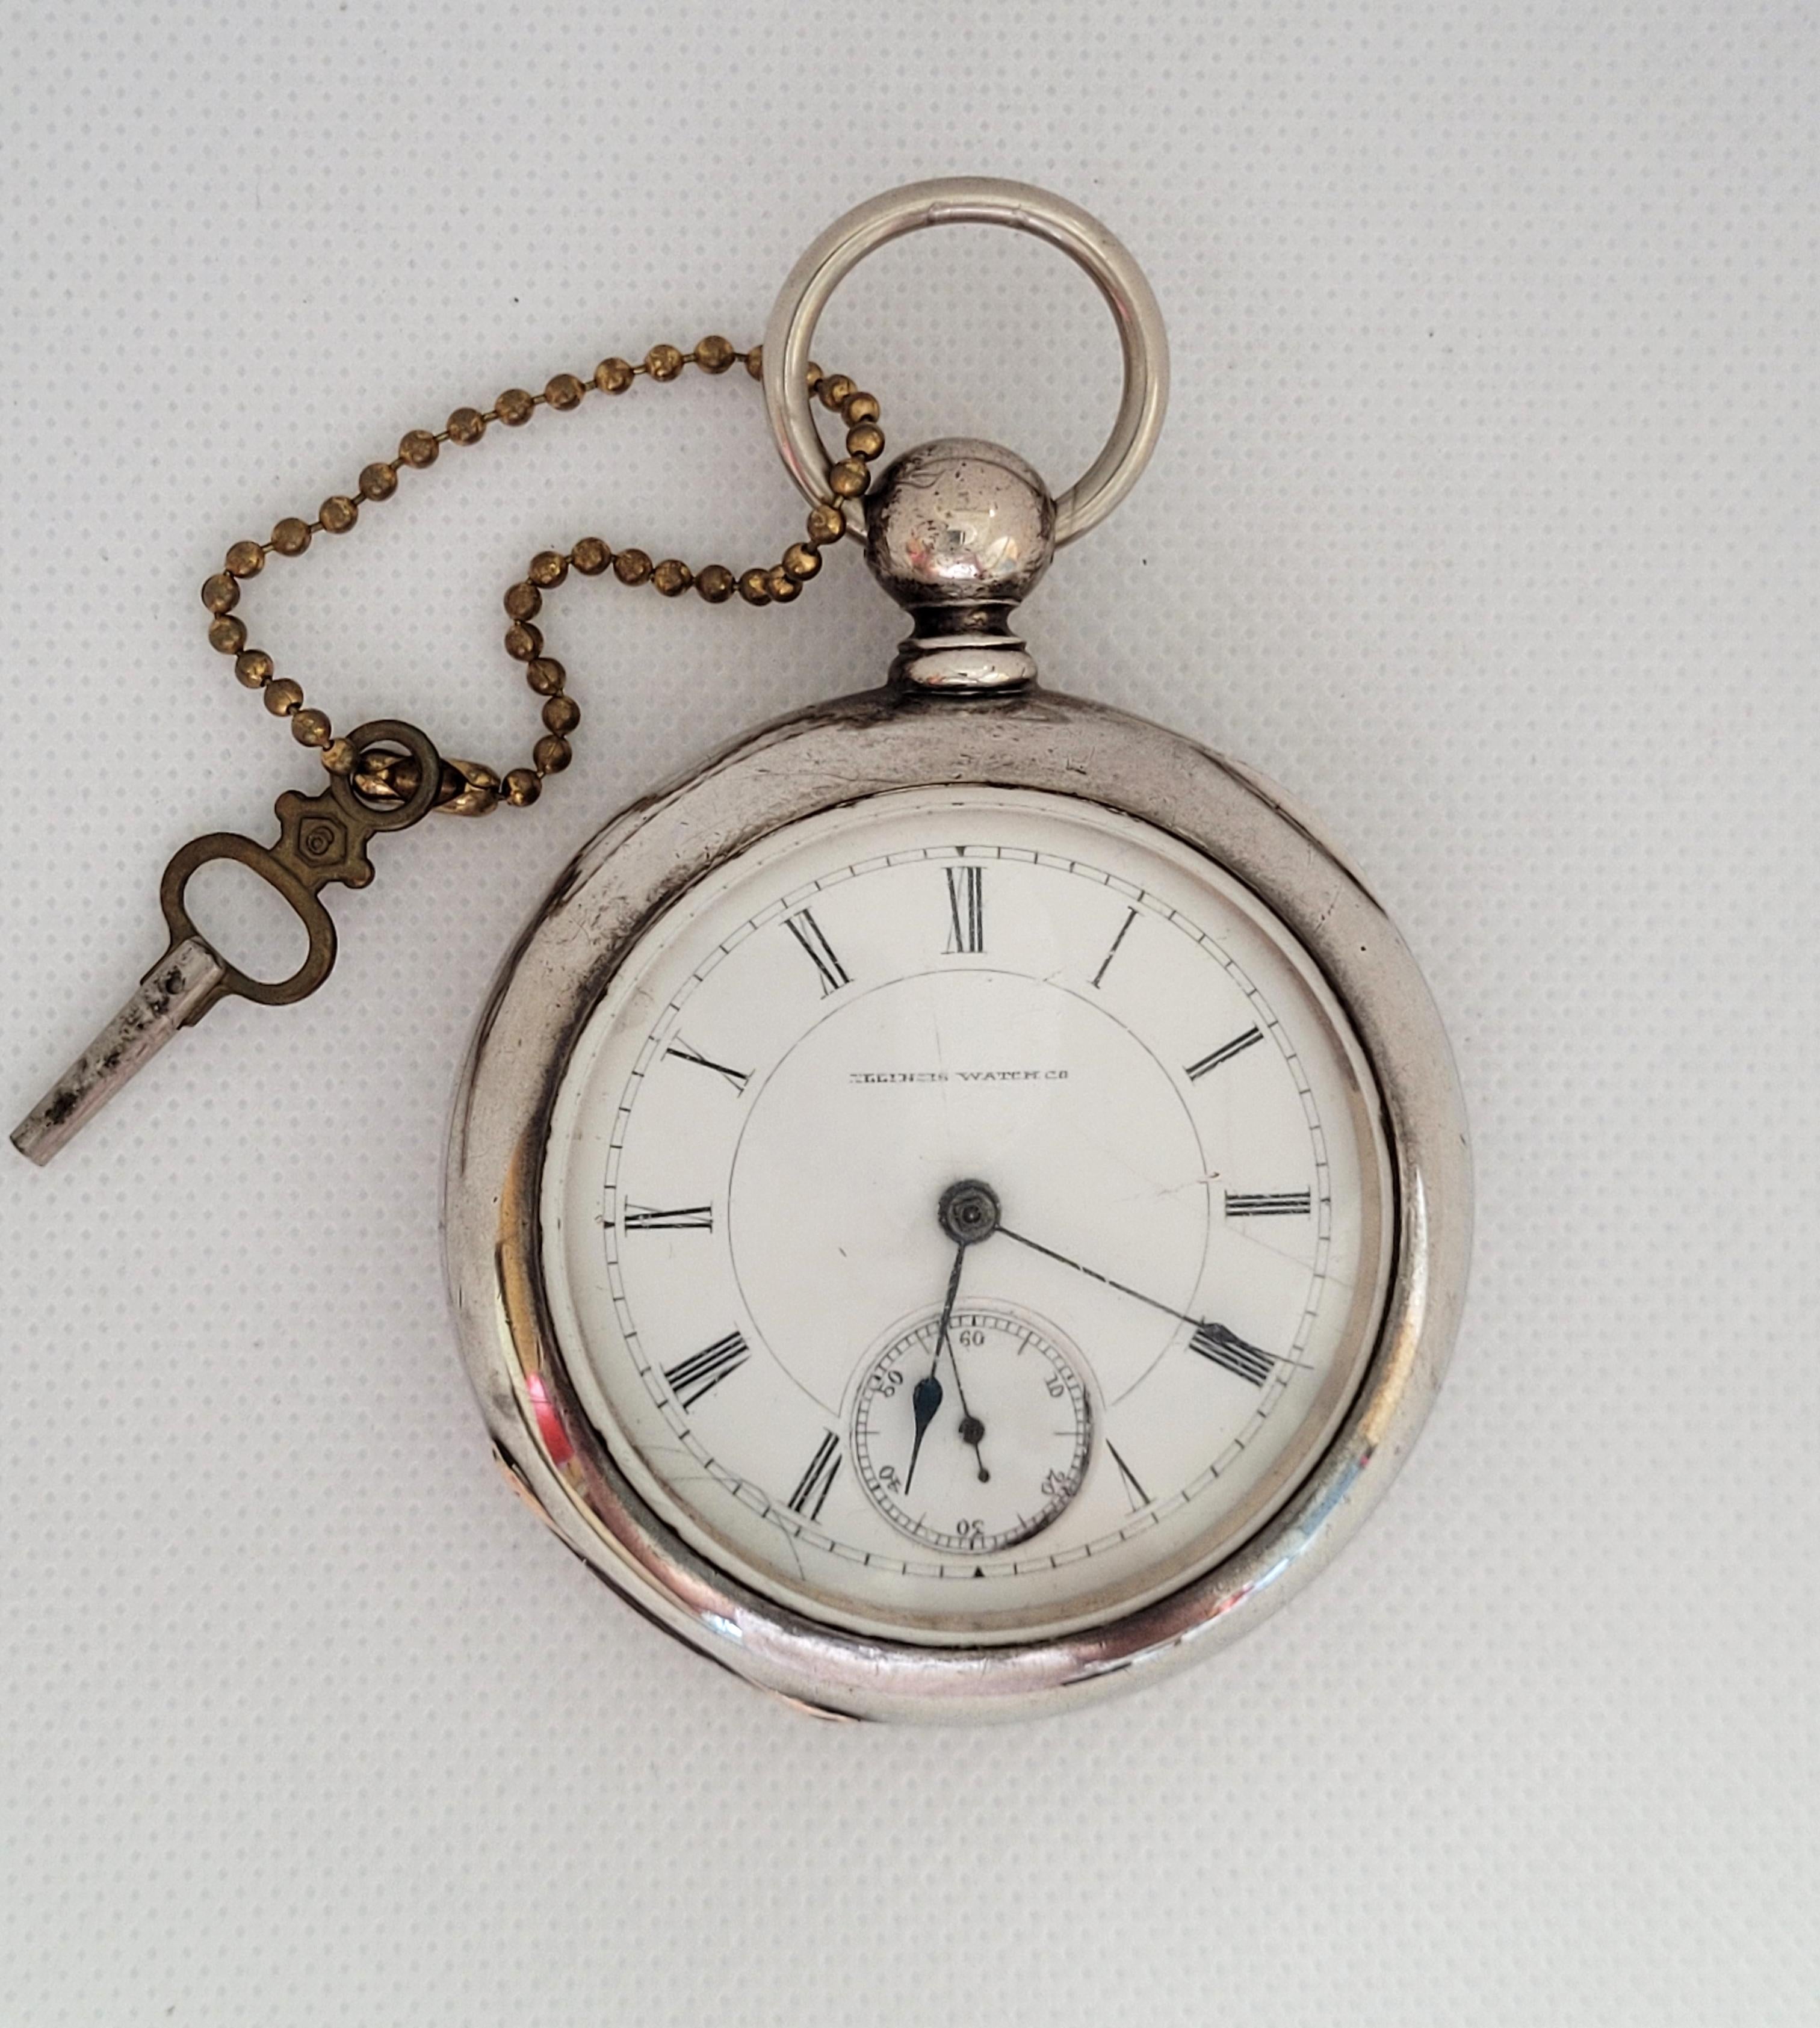 Vintage Illinois co. pocket watch in good working condition. Year 1886. The case is sterling silver, 60mm diameter, 20mm thick with a thick glass crystal that is clean with very slight scratches. The movement serial number is 66472, working, 11